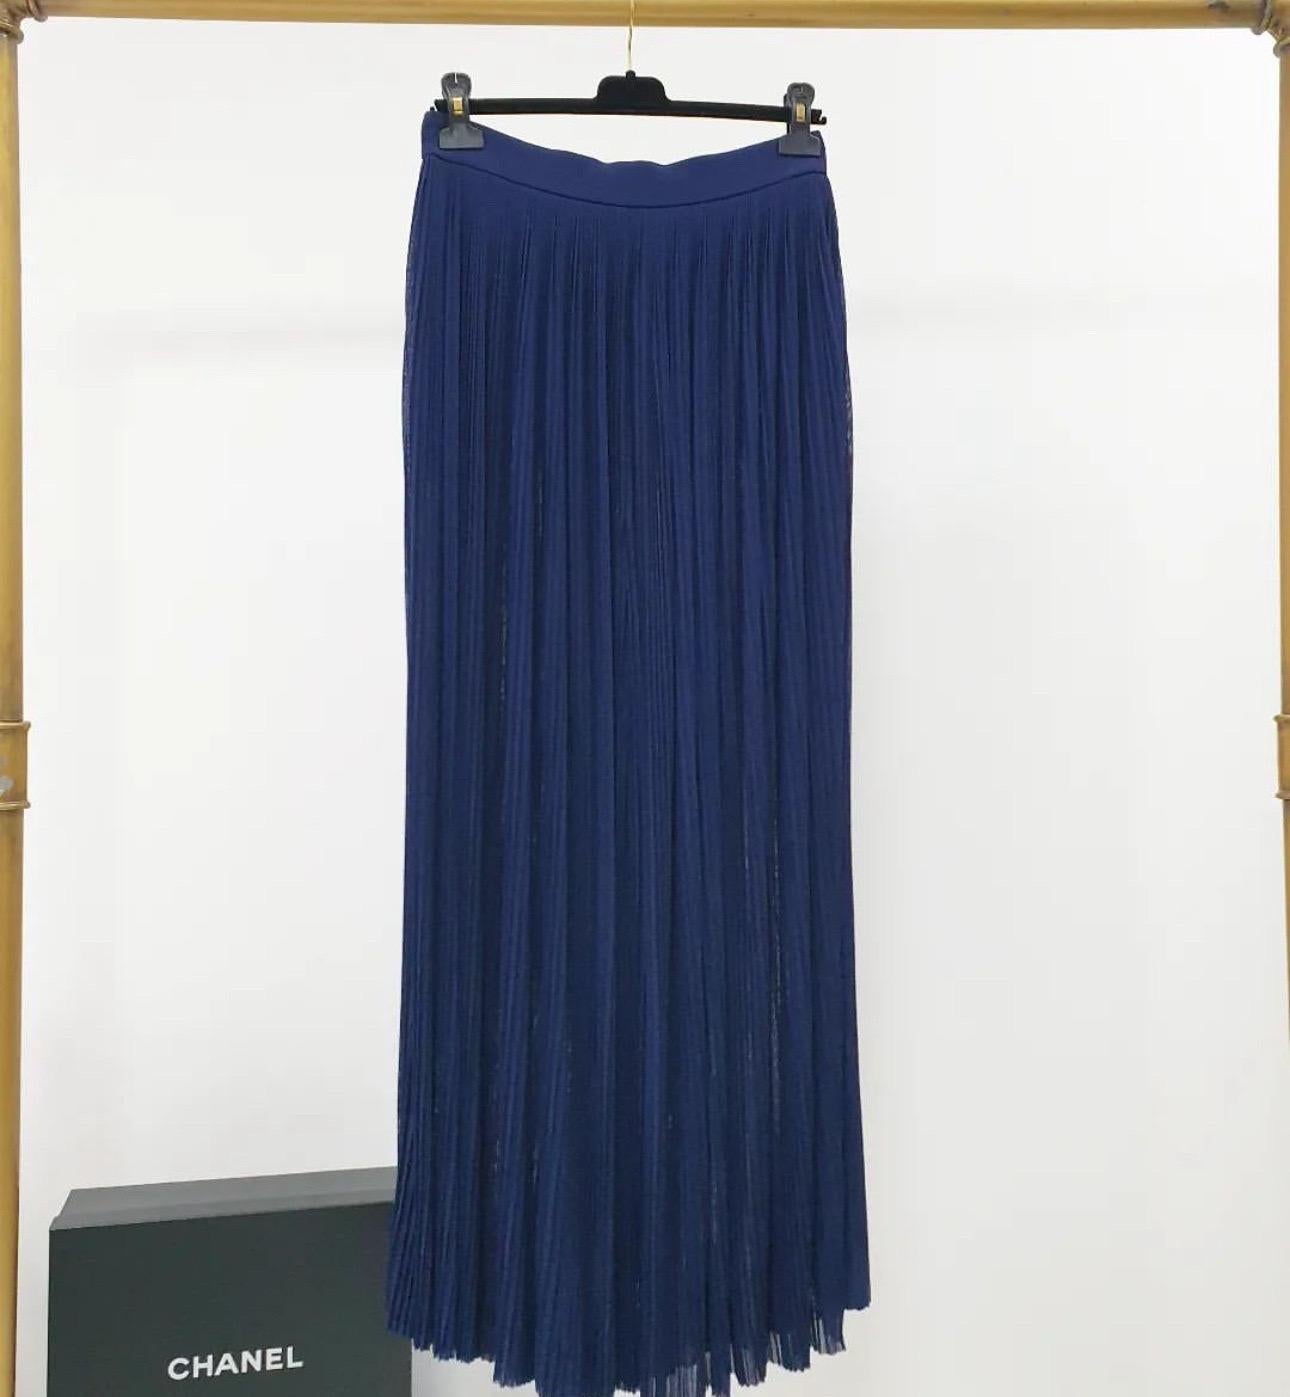 CHANEL 18C Greece Runway Navy Blue Wide Leg Pants Trousers In Good Condition For Sale In Krakow, PL